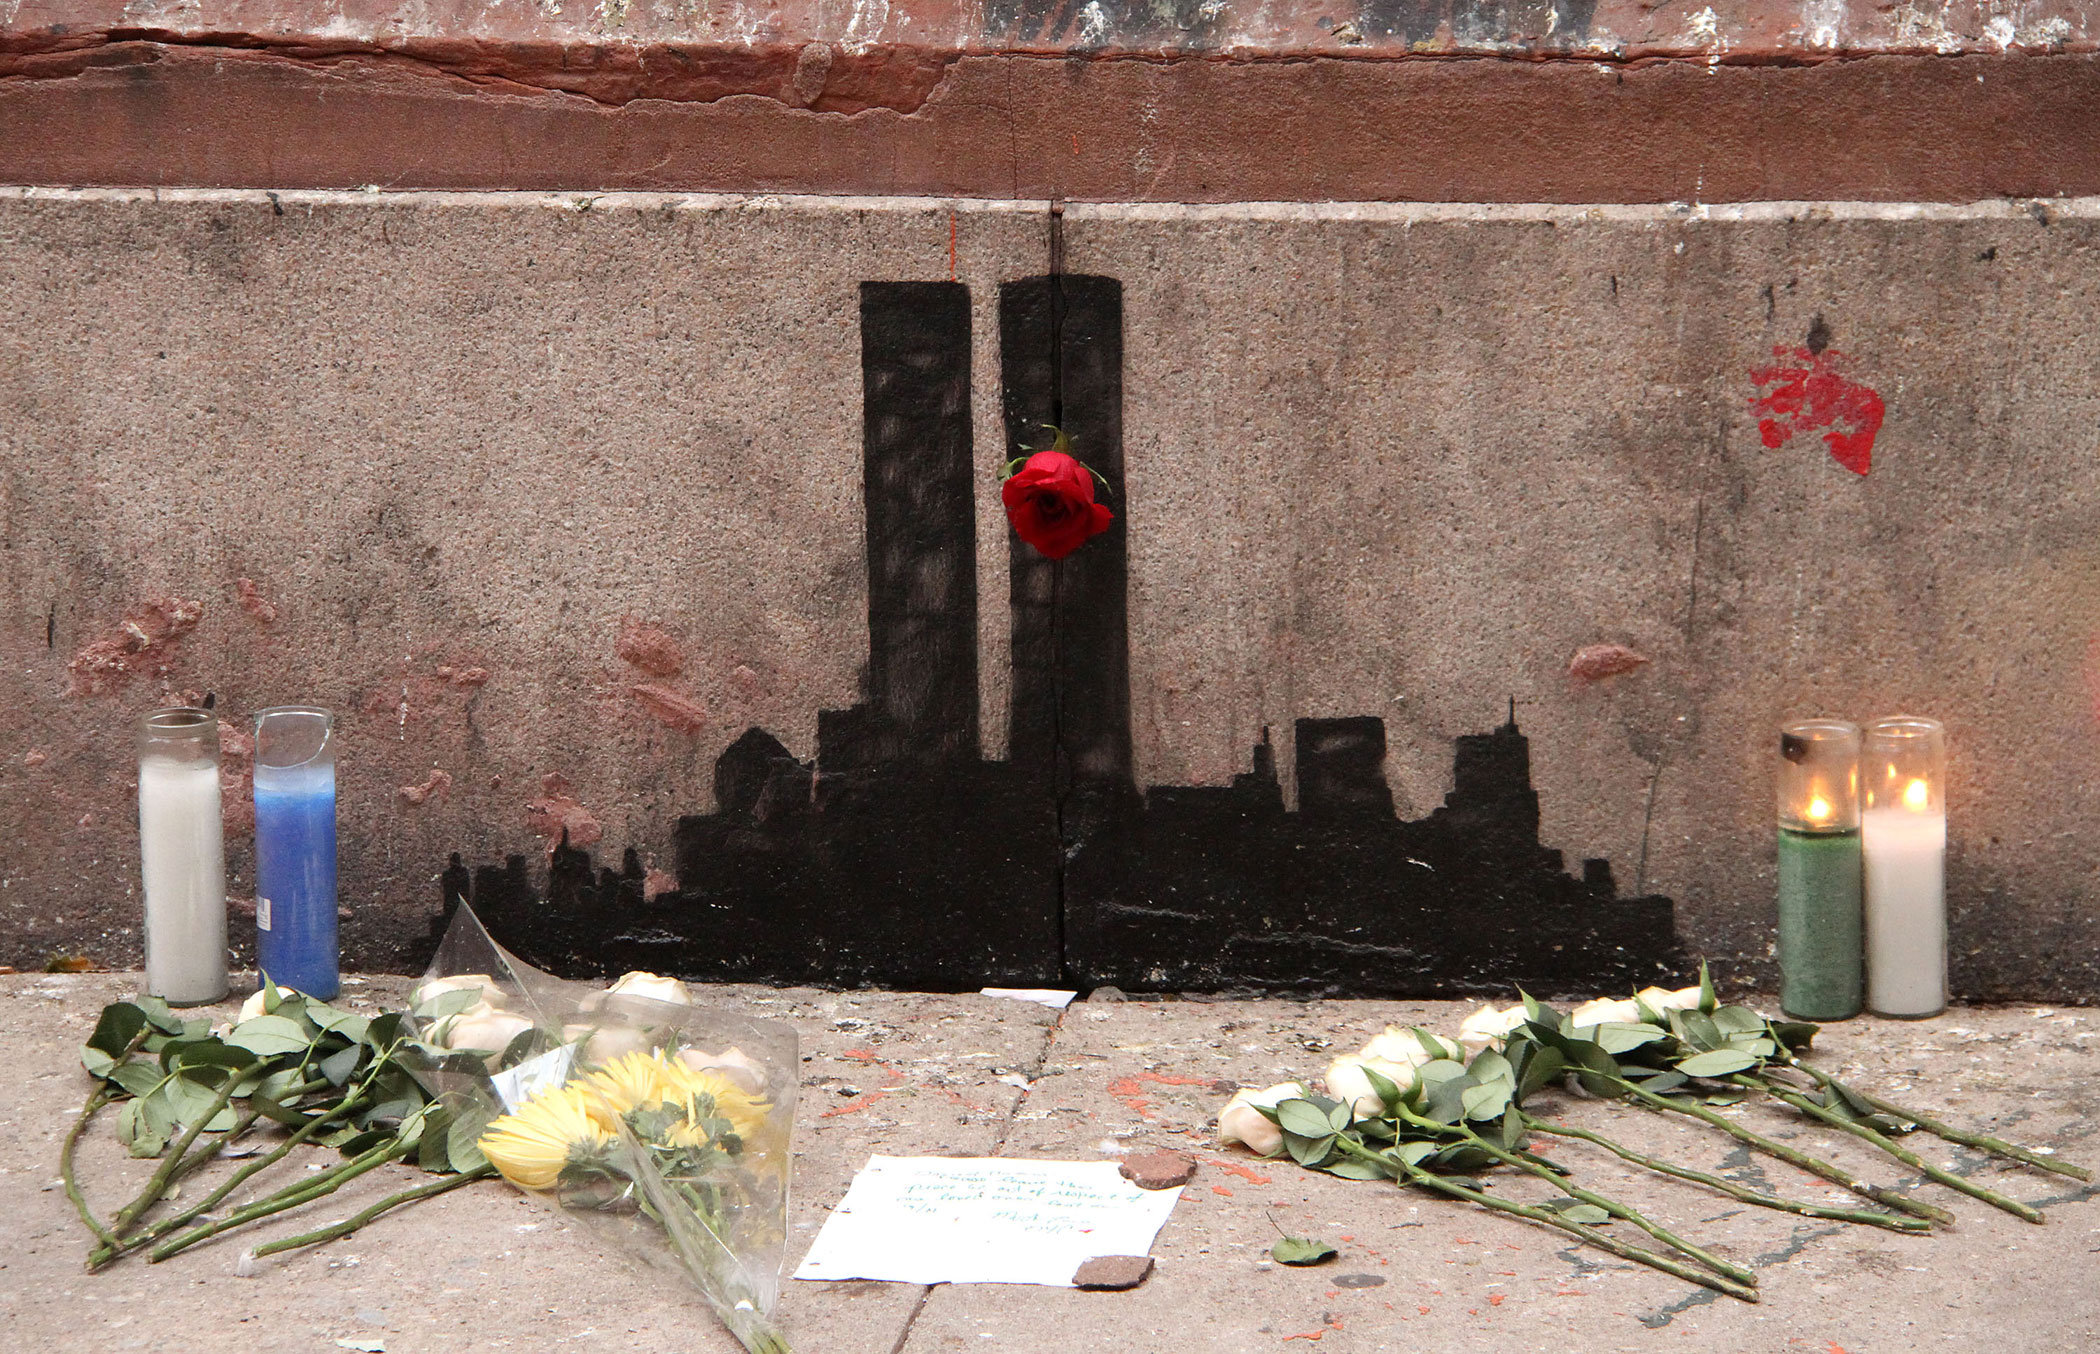 Banksy's 9/11 tribute featuring the Twin Towers located at Staple Street in TriBeCa, New York City, Oct. 16, 2013.